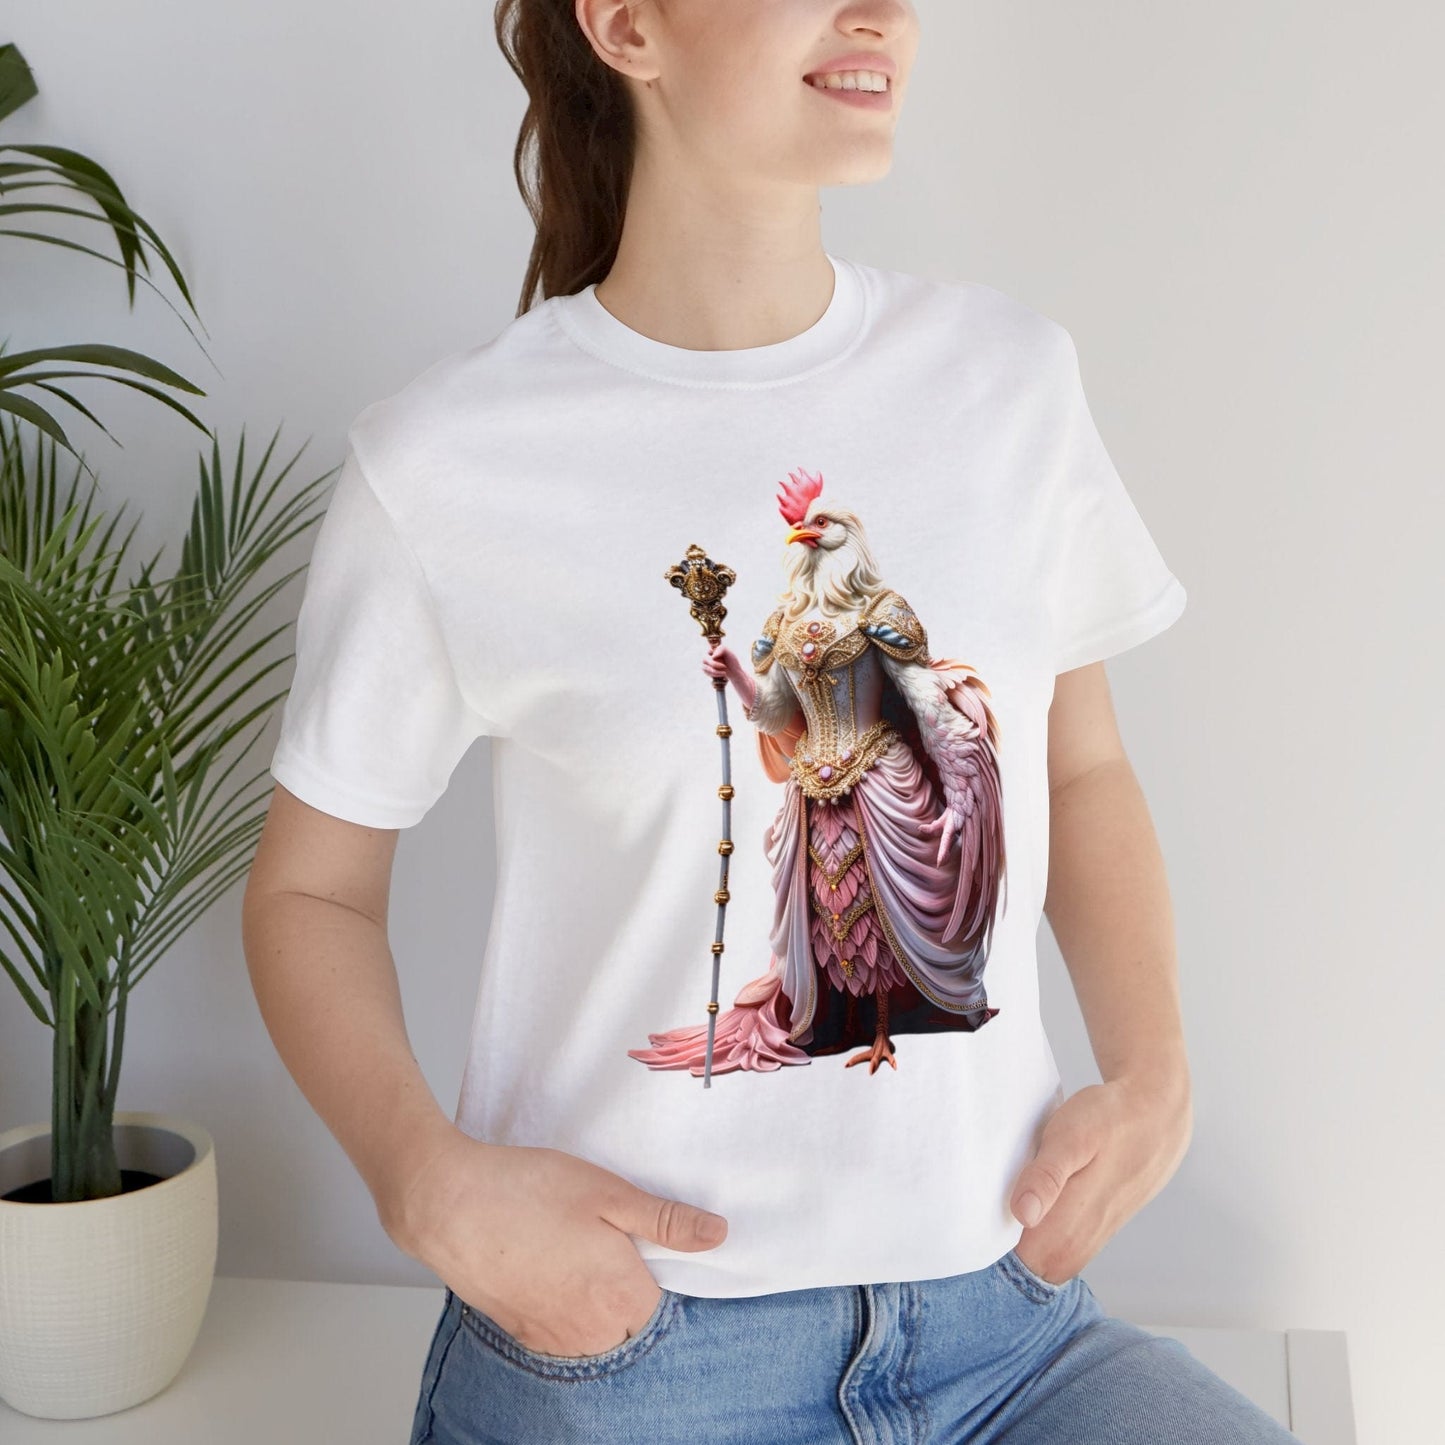 For USA customers: Queen Cluck on Bella+Canvas3001 Unisex Tee